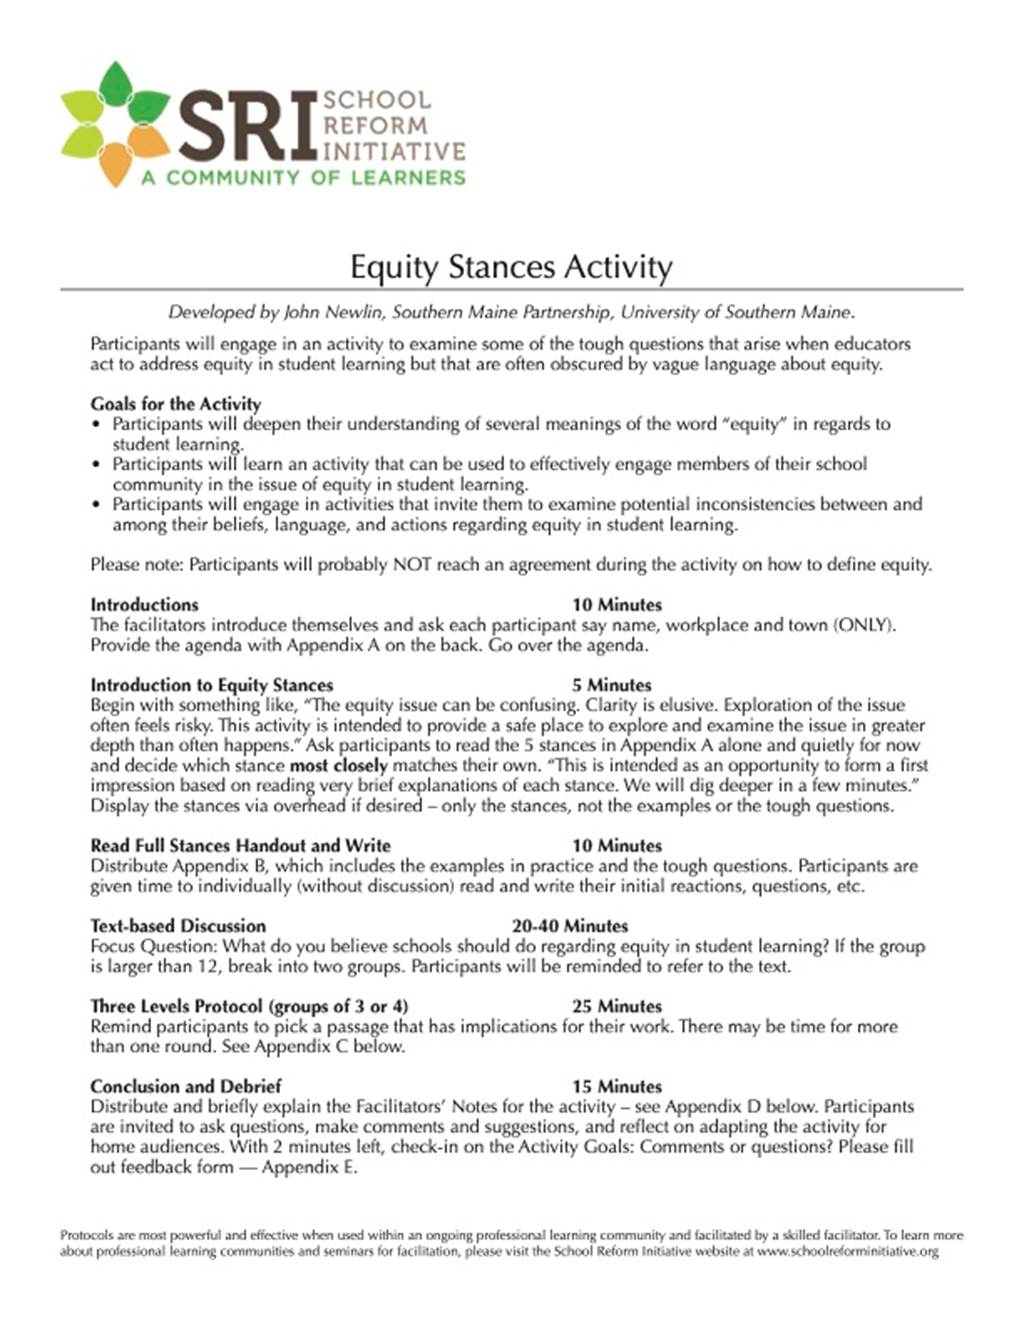 Equity Stances Activity - image